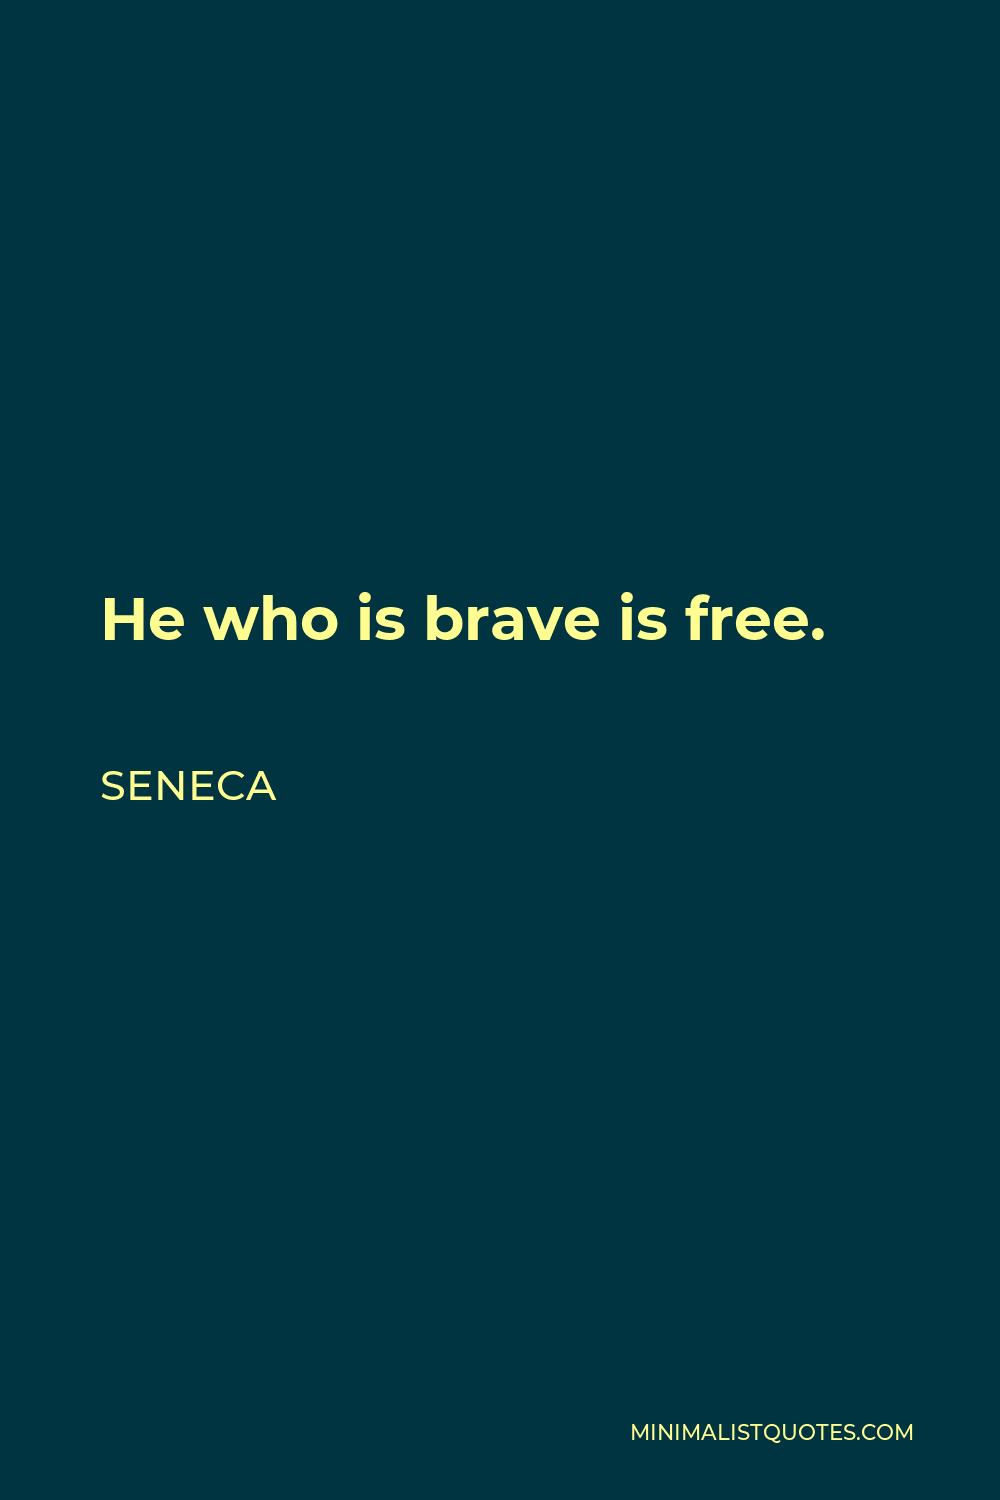 Seneca Quote - He who is brave is free.